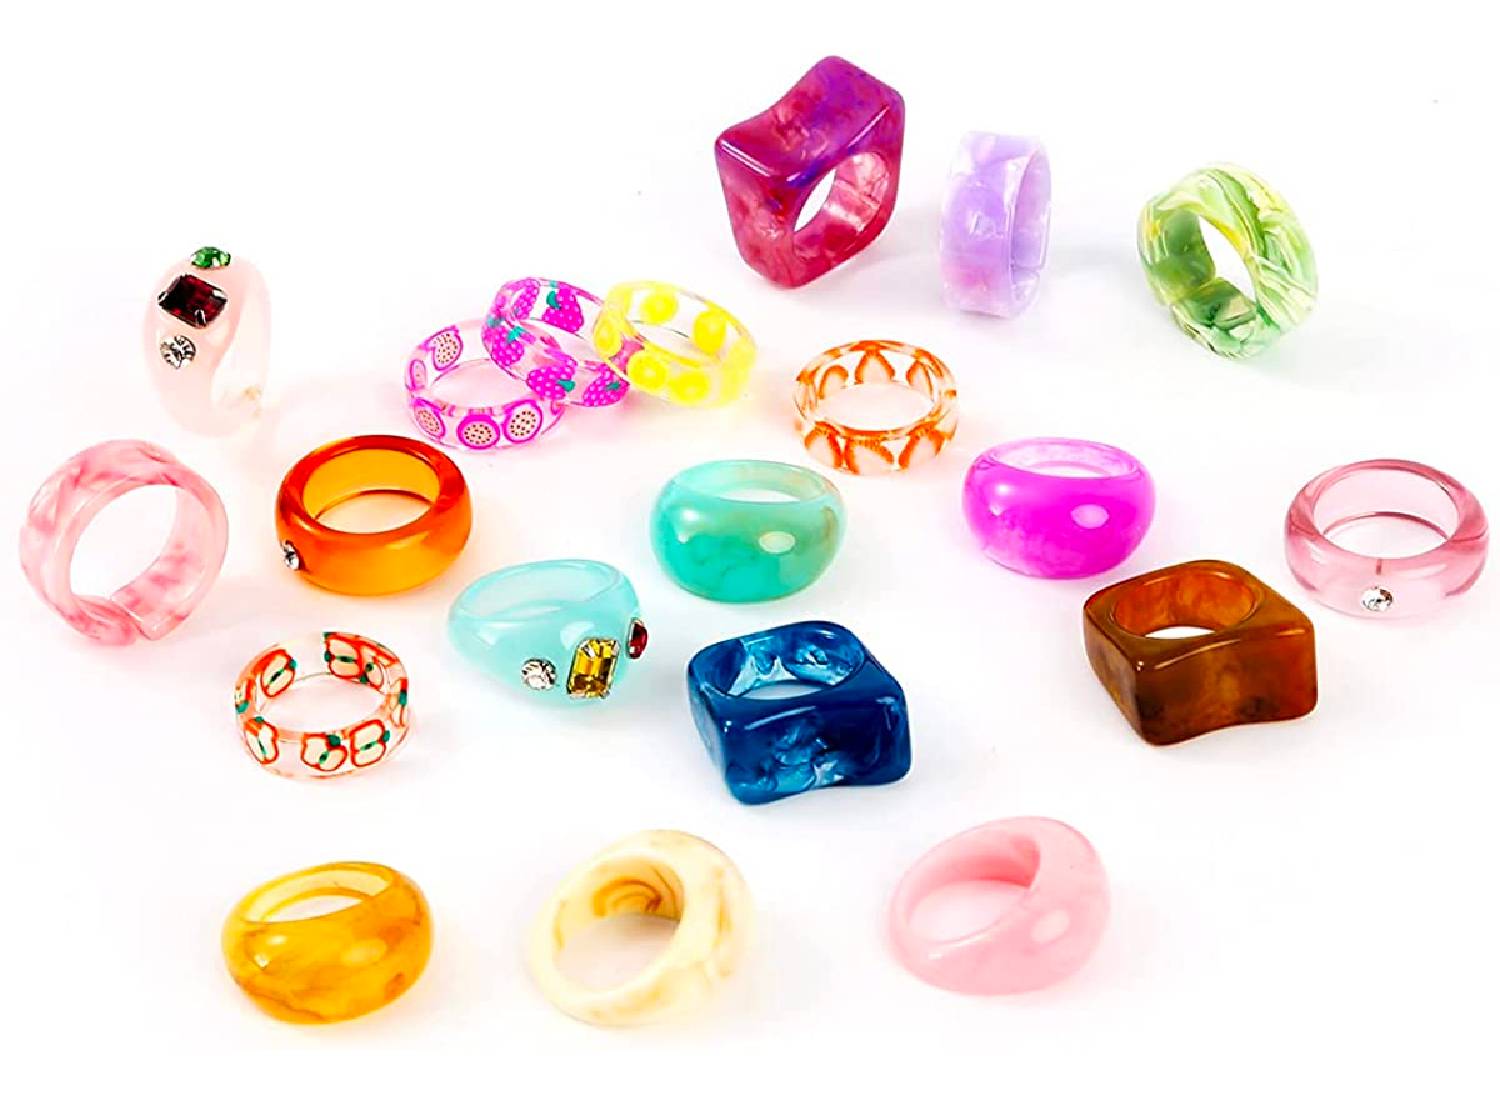 A set of 20 multicolored resin rings